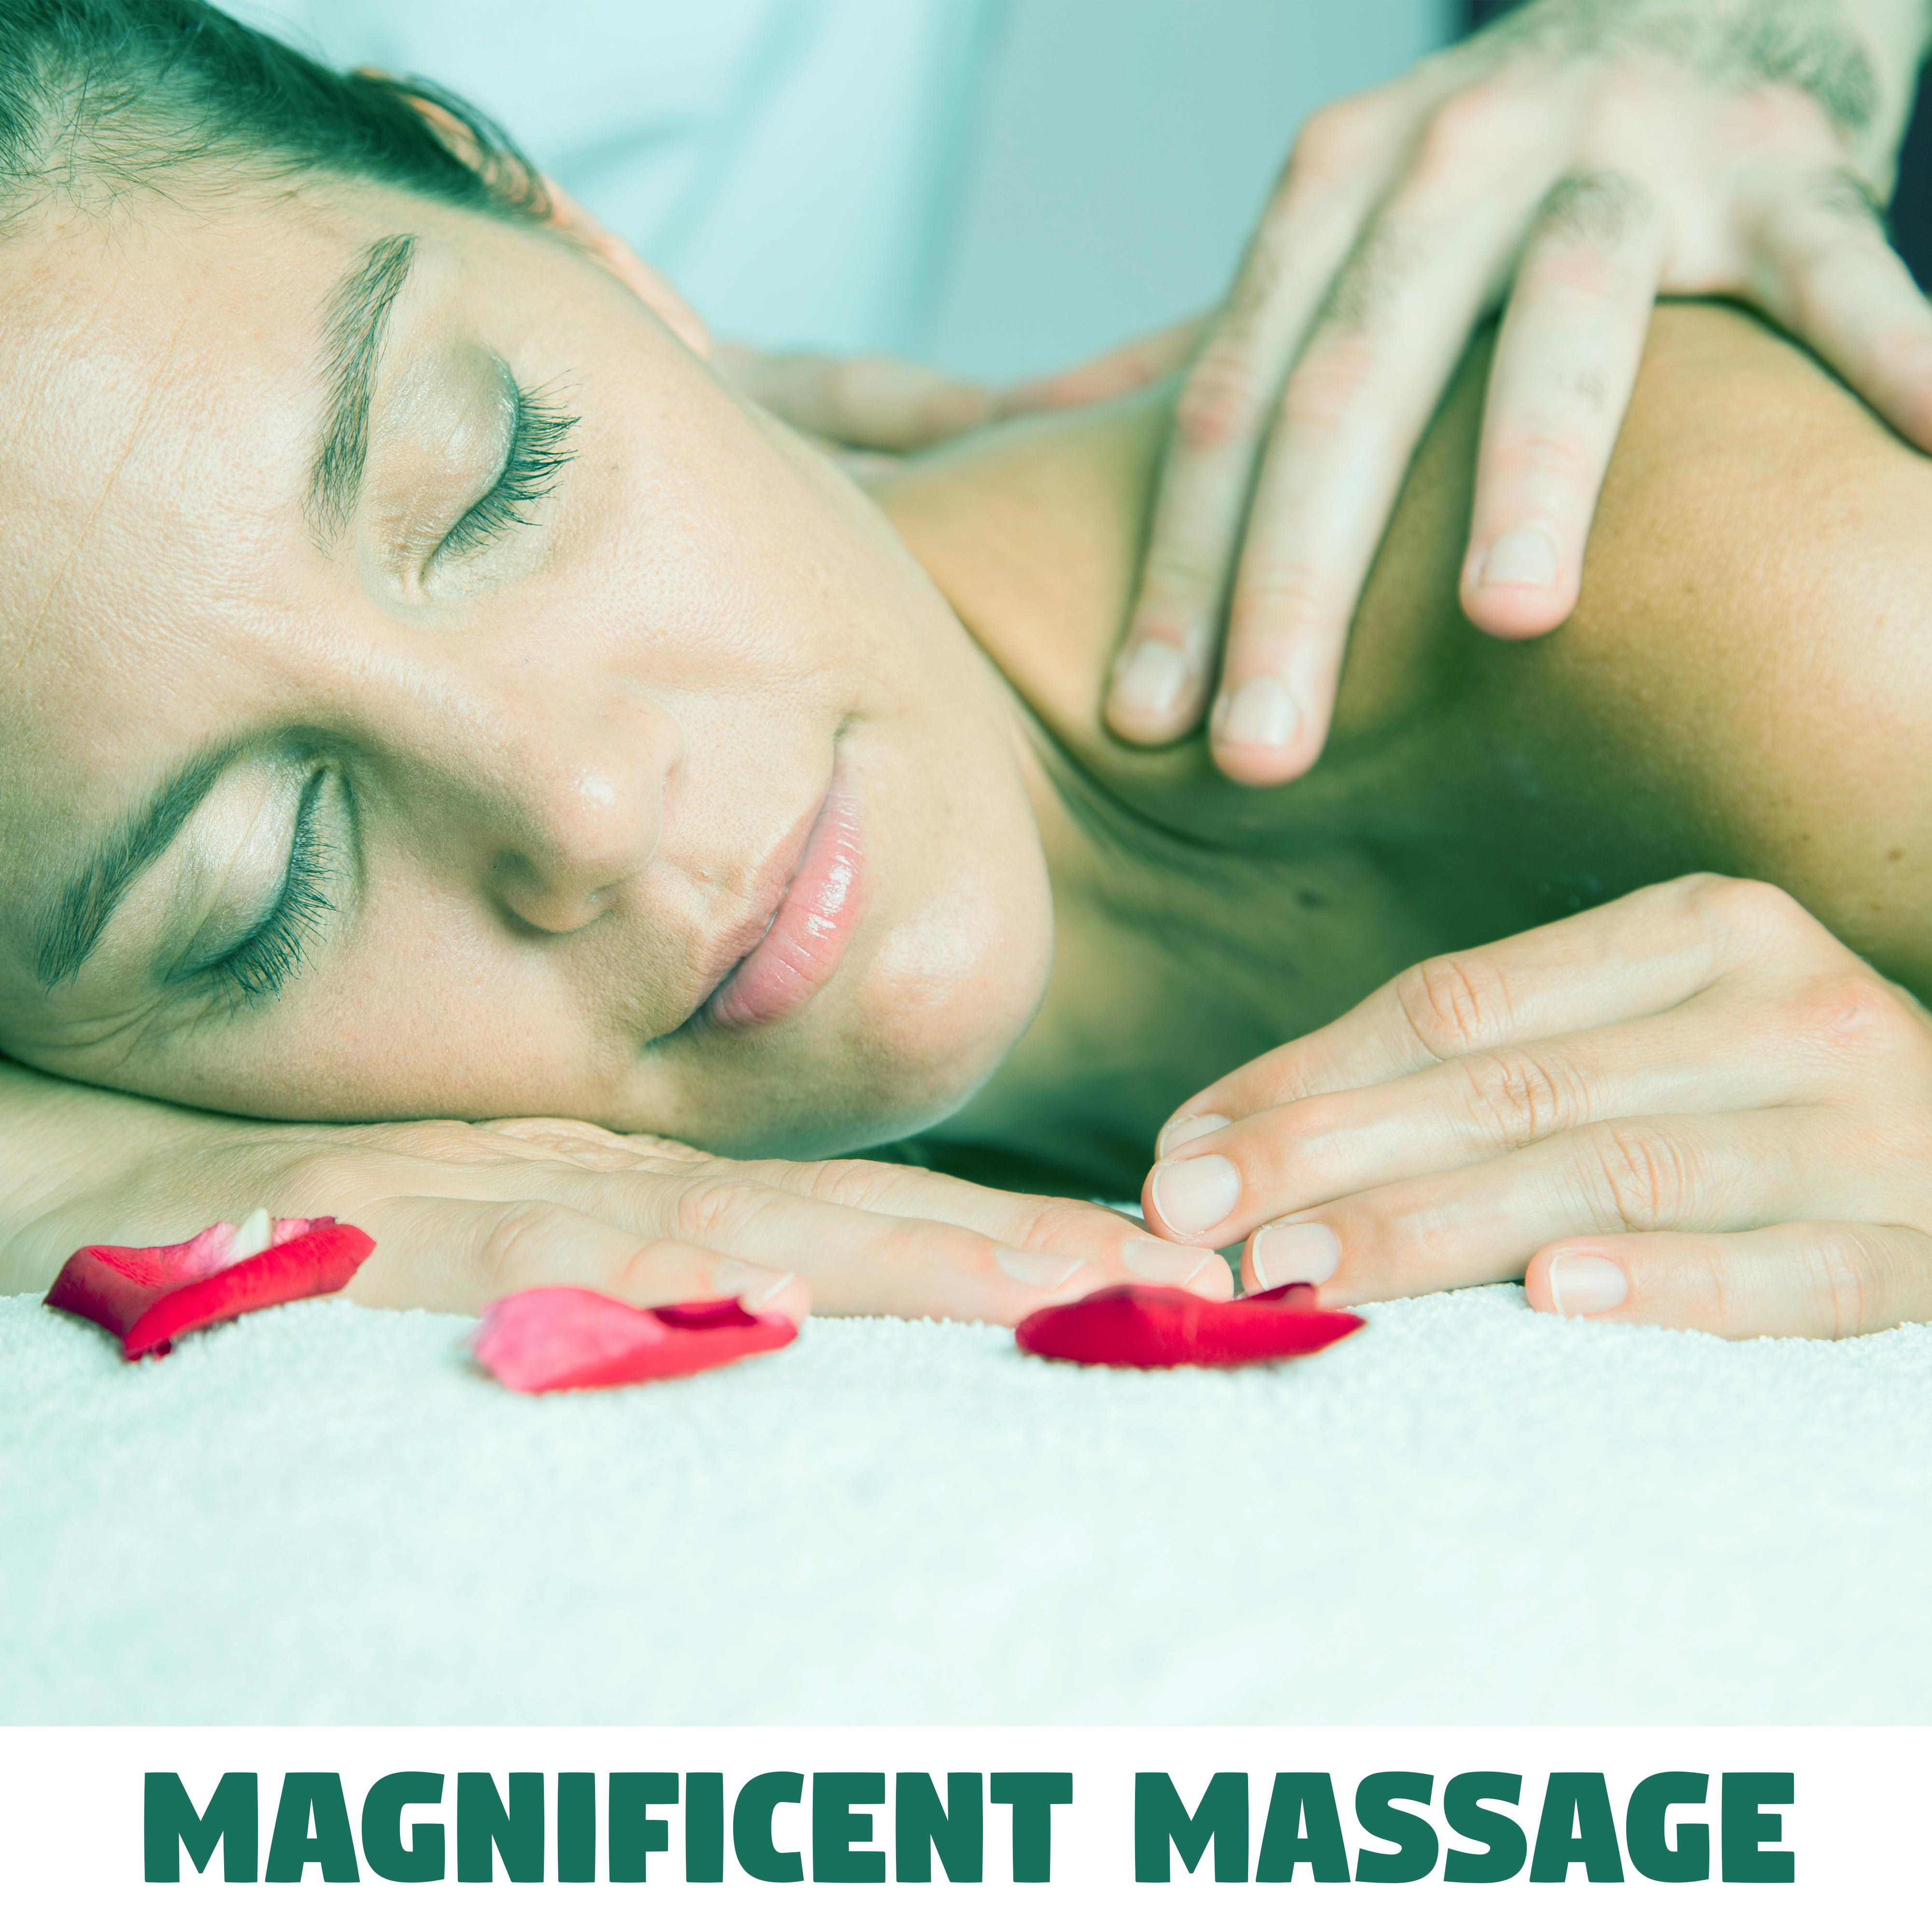 Magnificent Massage - Relaxation Moments, Home Spa, Regeneration of Body, Quiet Thoughts, Relaxing Sounds, Helping Nature